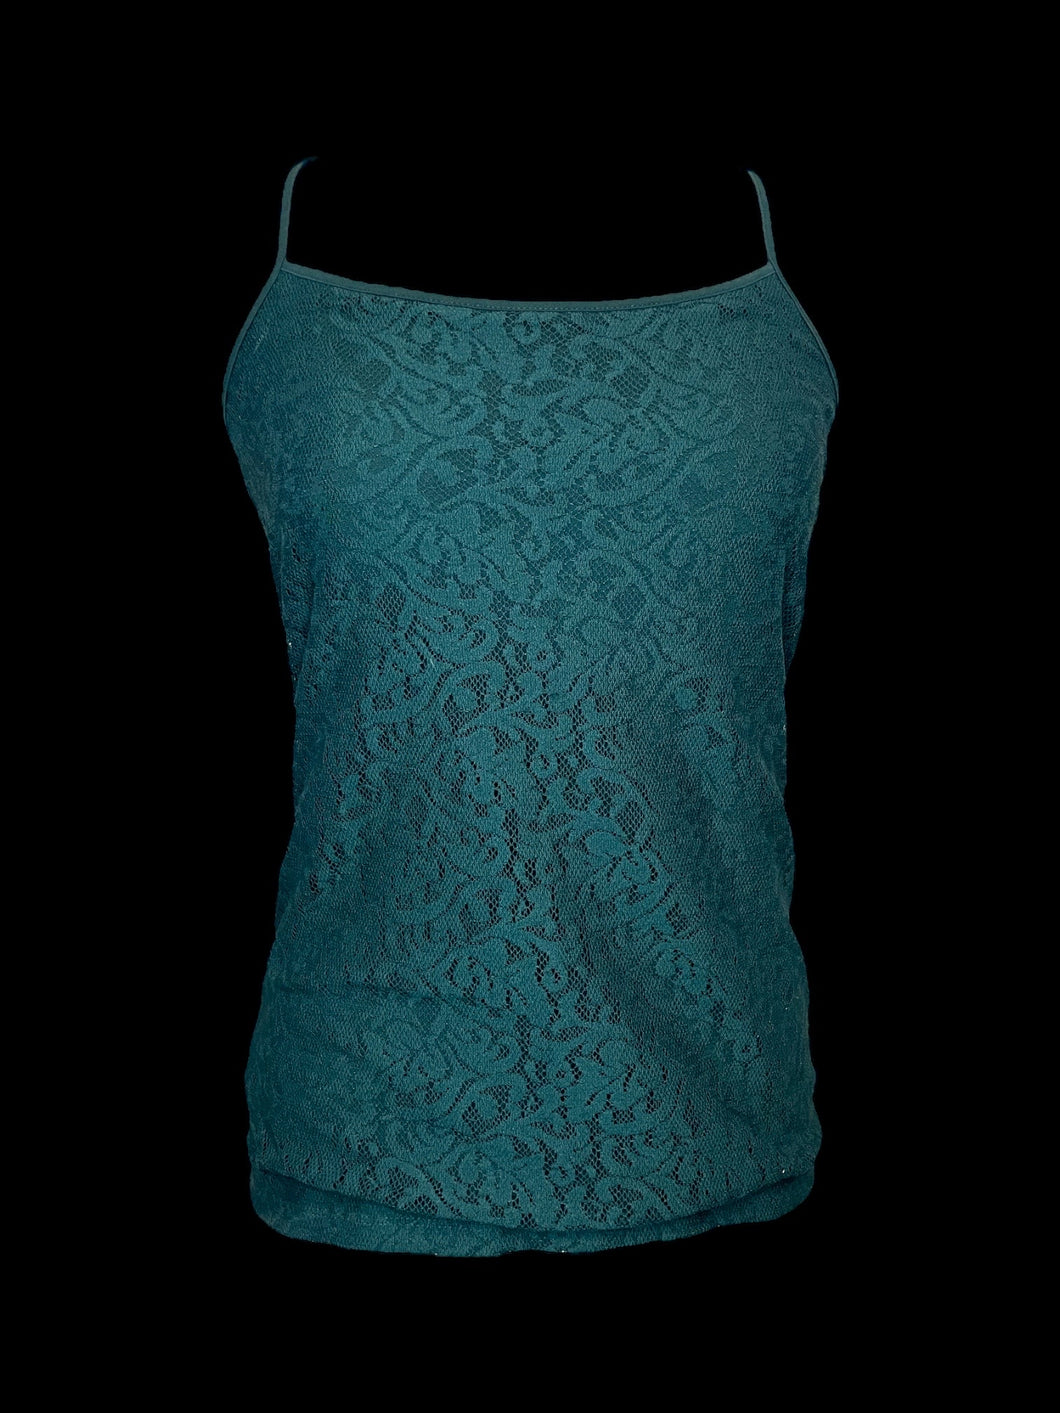 S Dark green lace front sleeveless square neckline top w/ adjustable straps